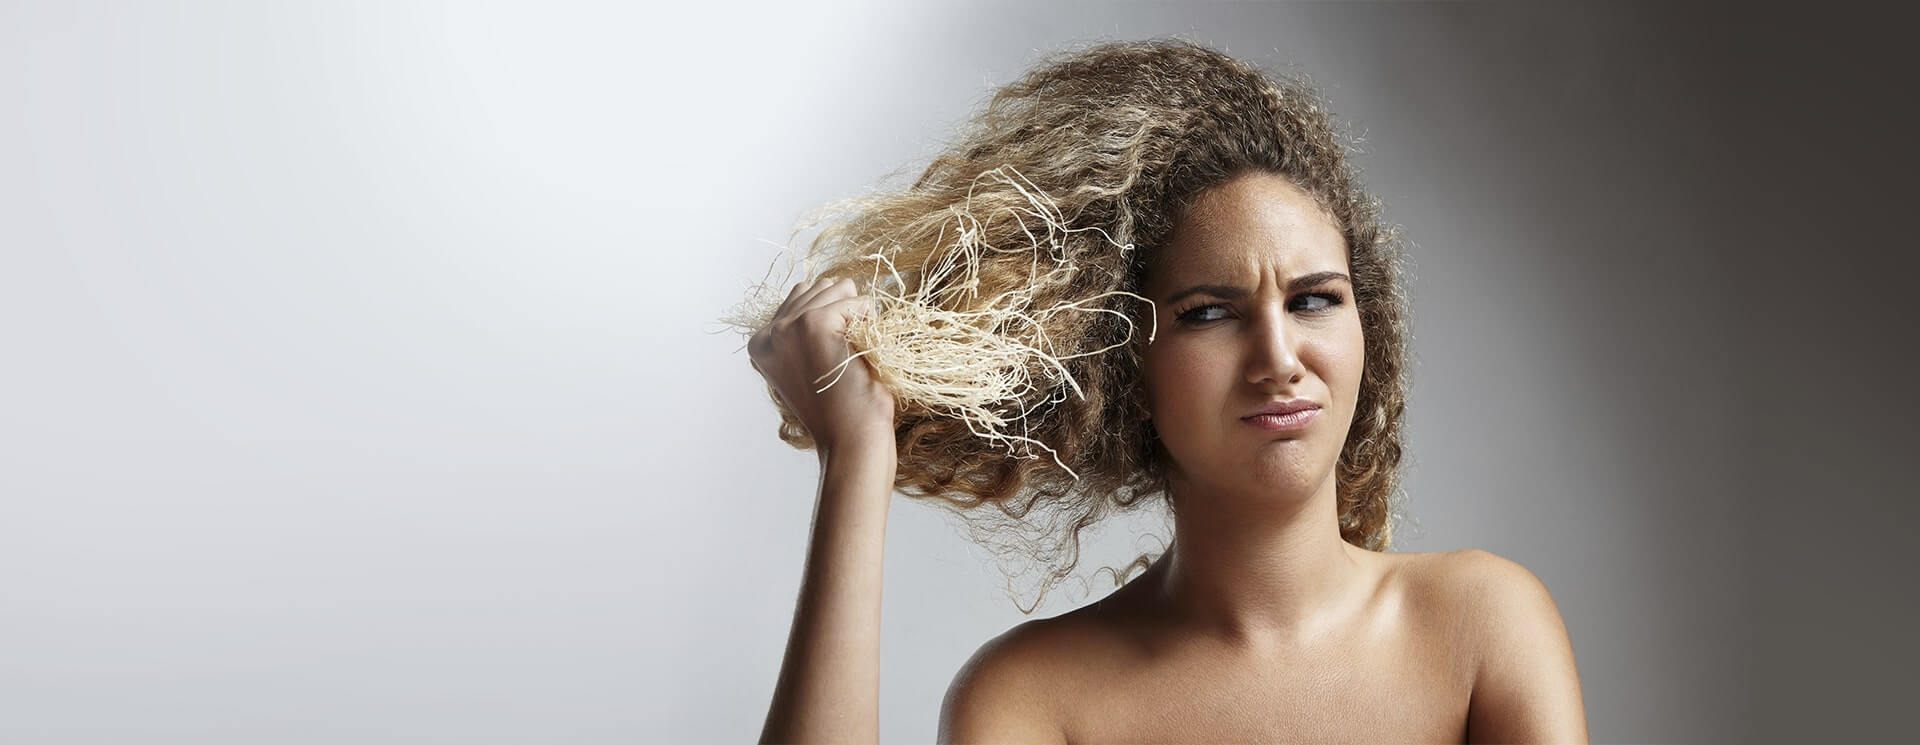 girl irritated by her dry hair